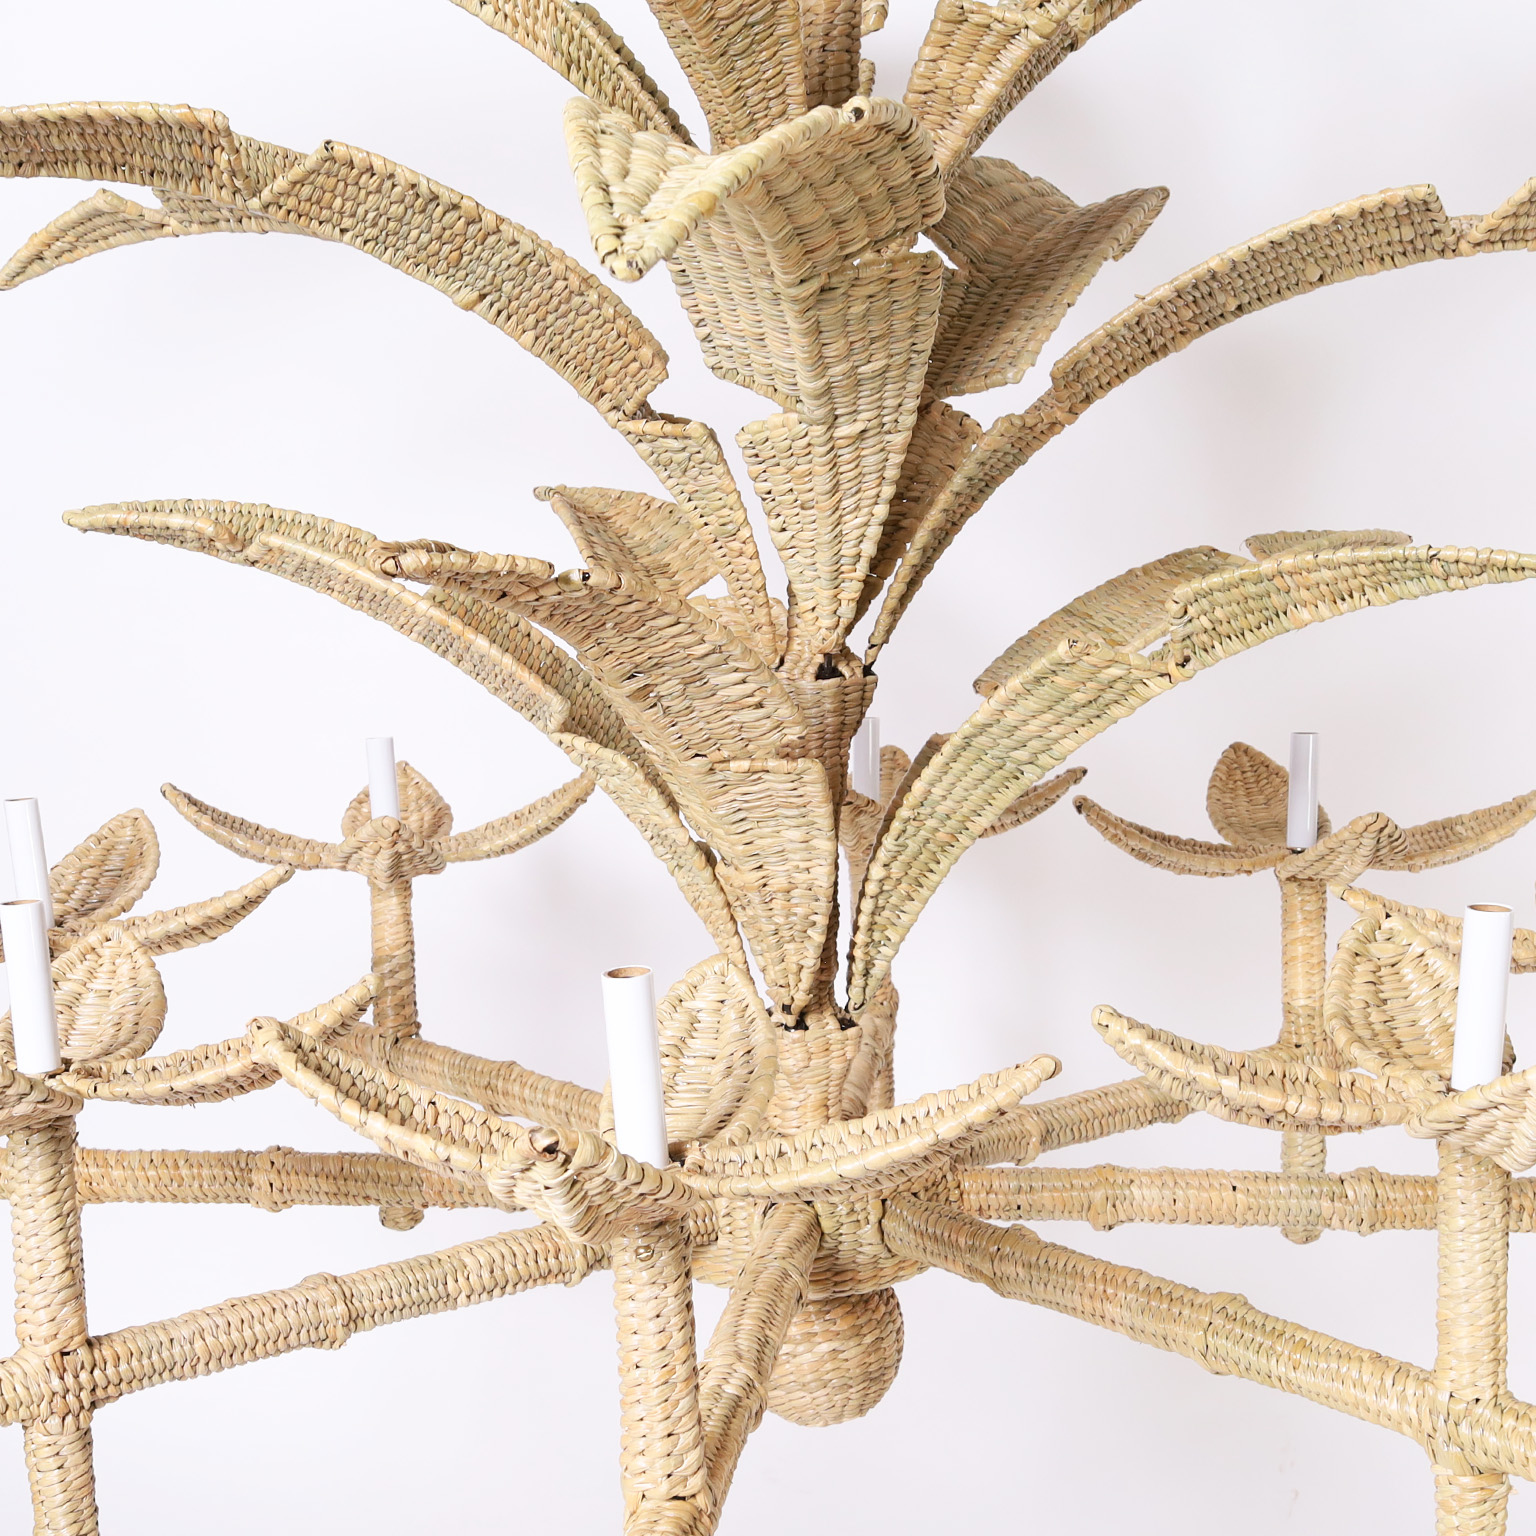 The Florencia Large Wicker Palm Leaf Chandelier from The FS Flores Collection